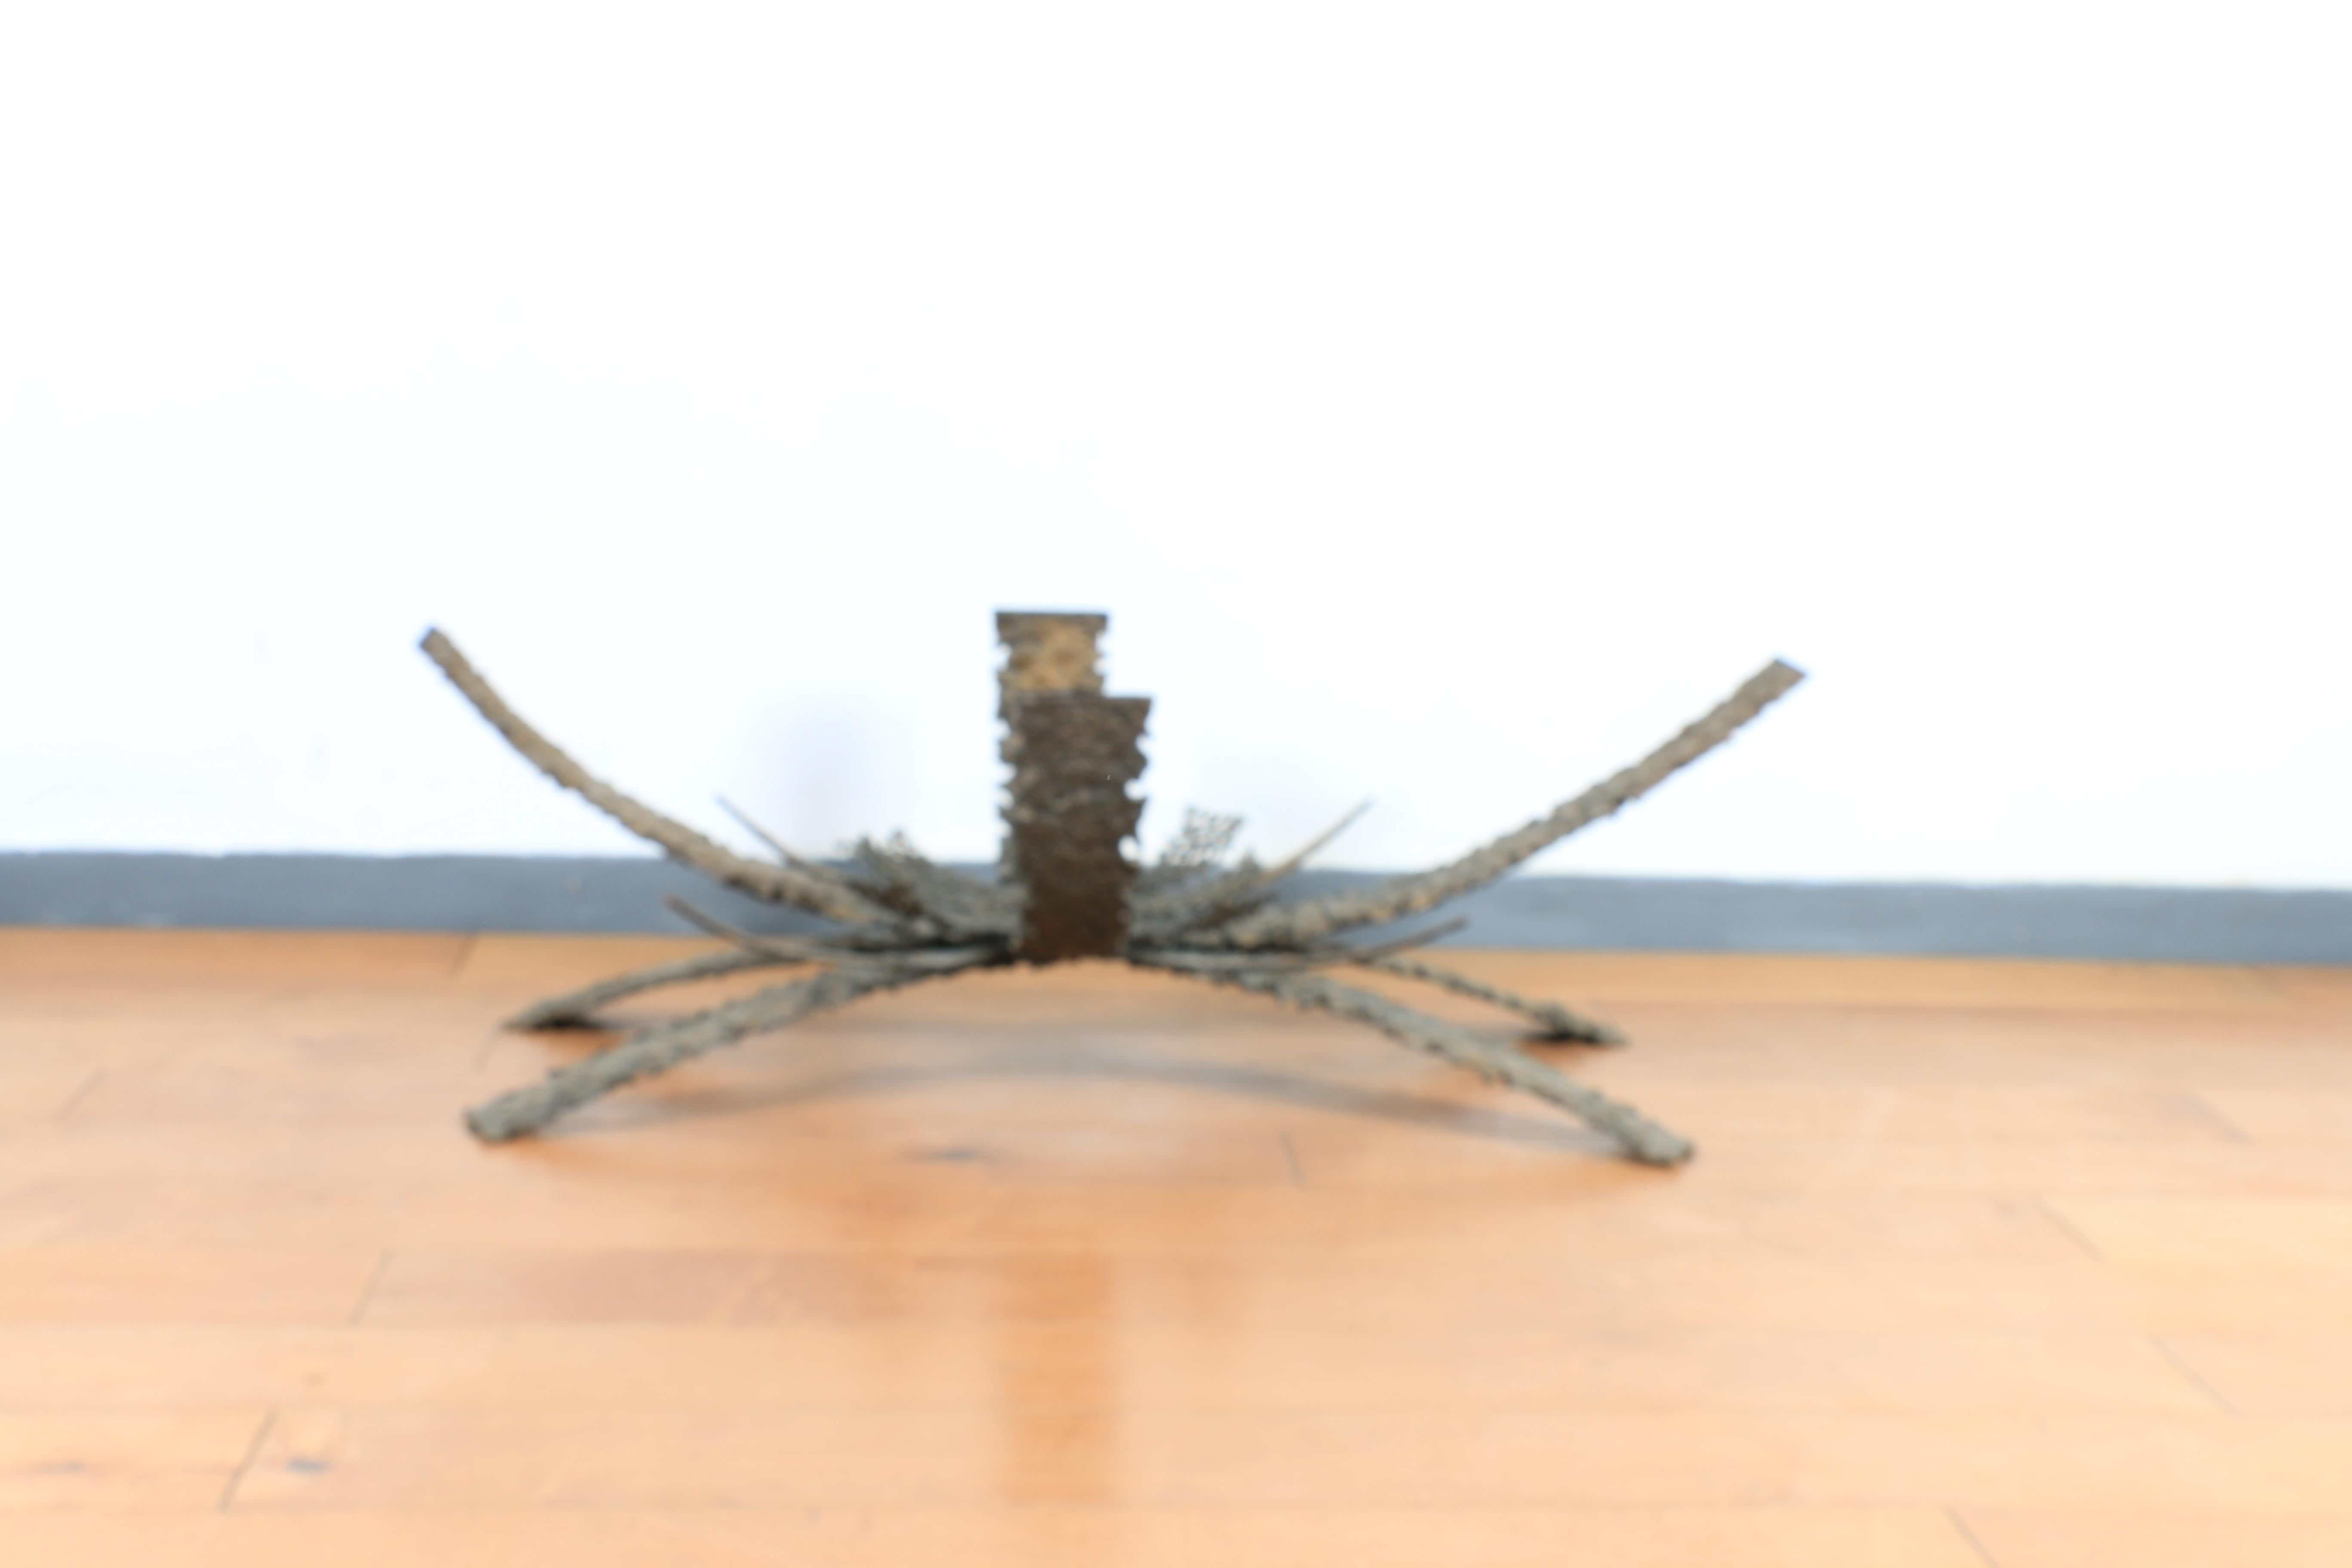 1960s Brutalist bronze coffee table by Daniel Gluck. This bronze coffee table is very heavy on the base and glass. Everything on this table is perfect and has no imperfections. Beautifully made bronze brutalist base.